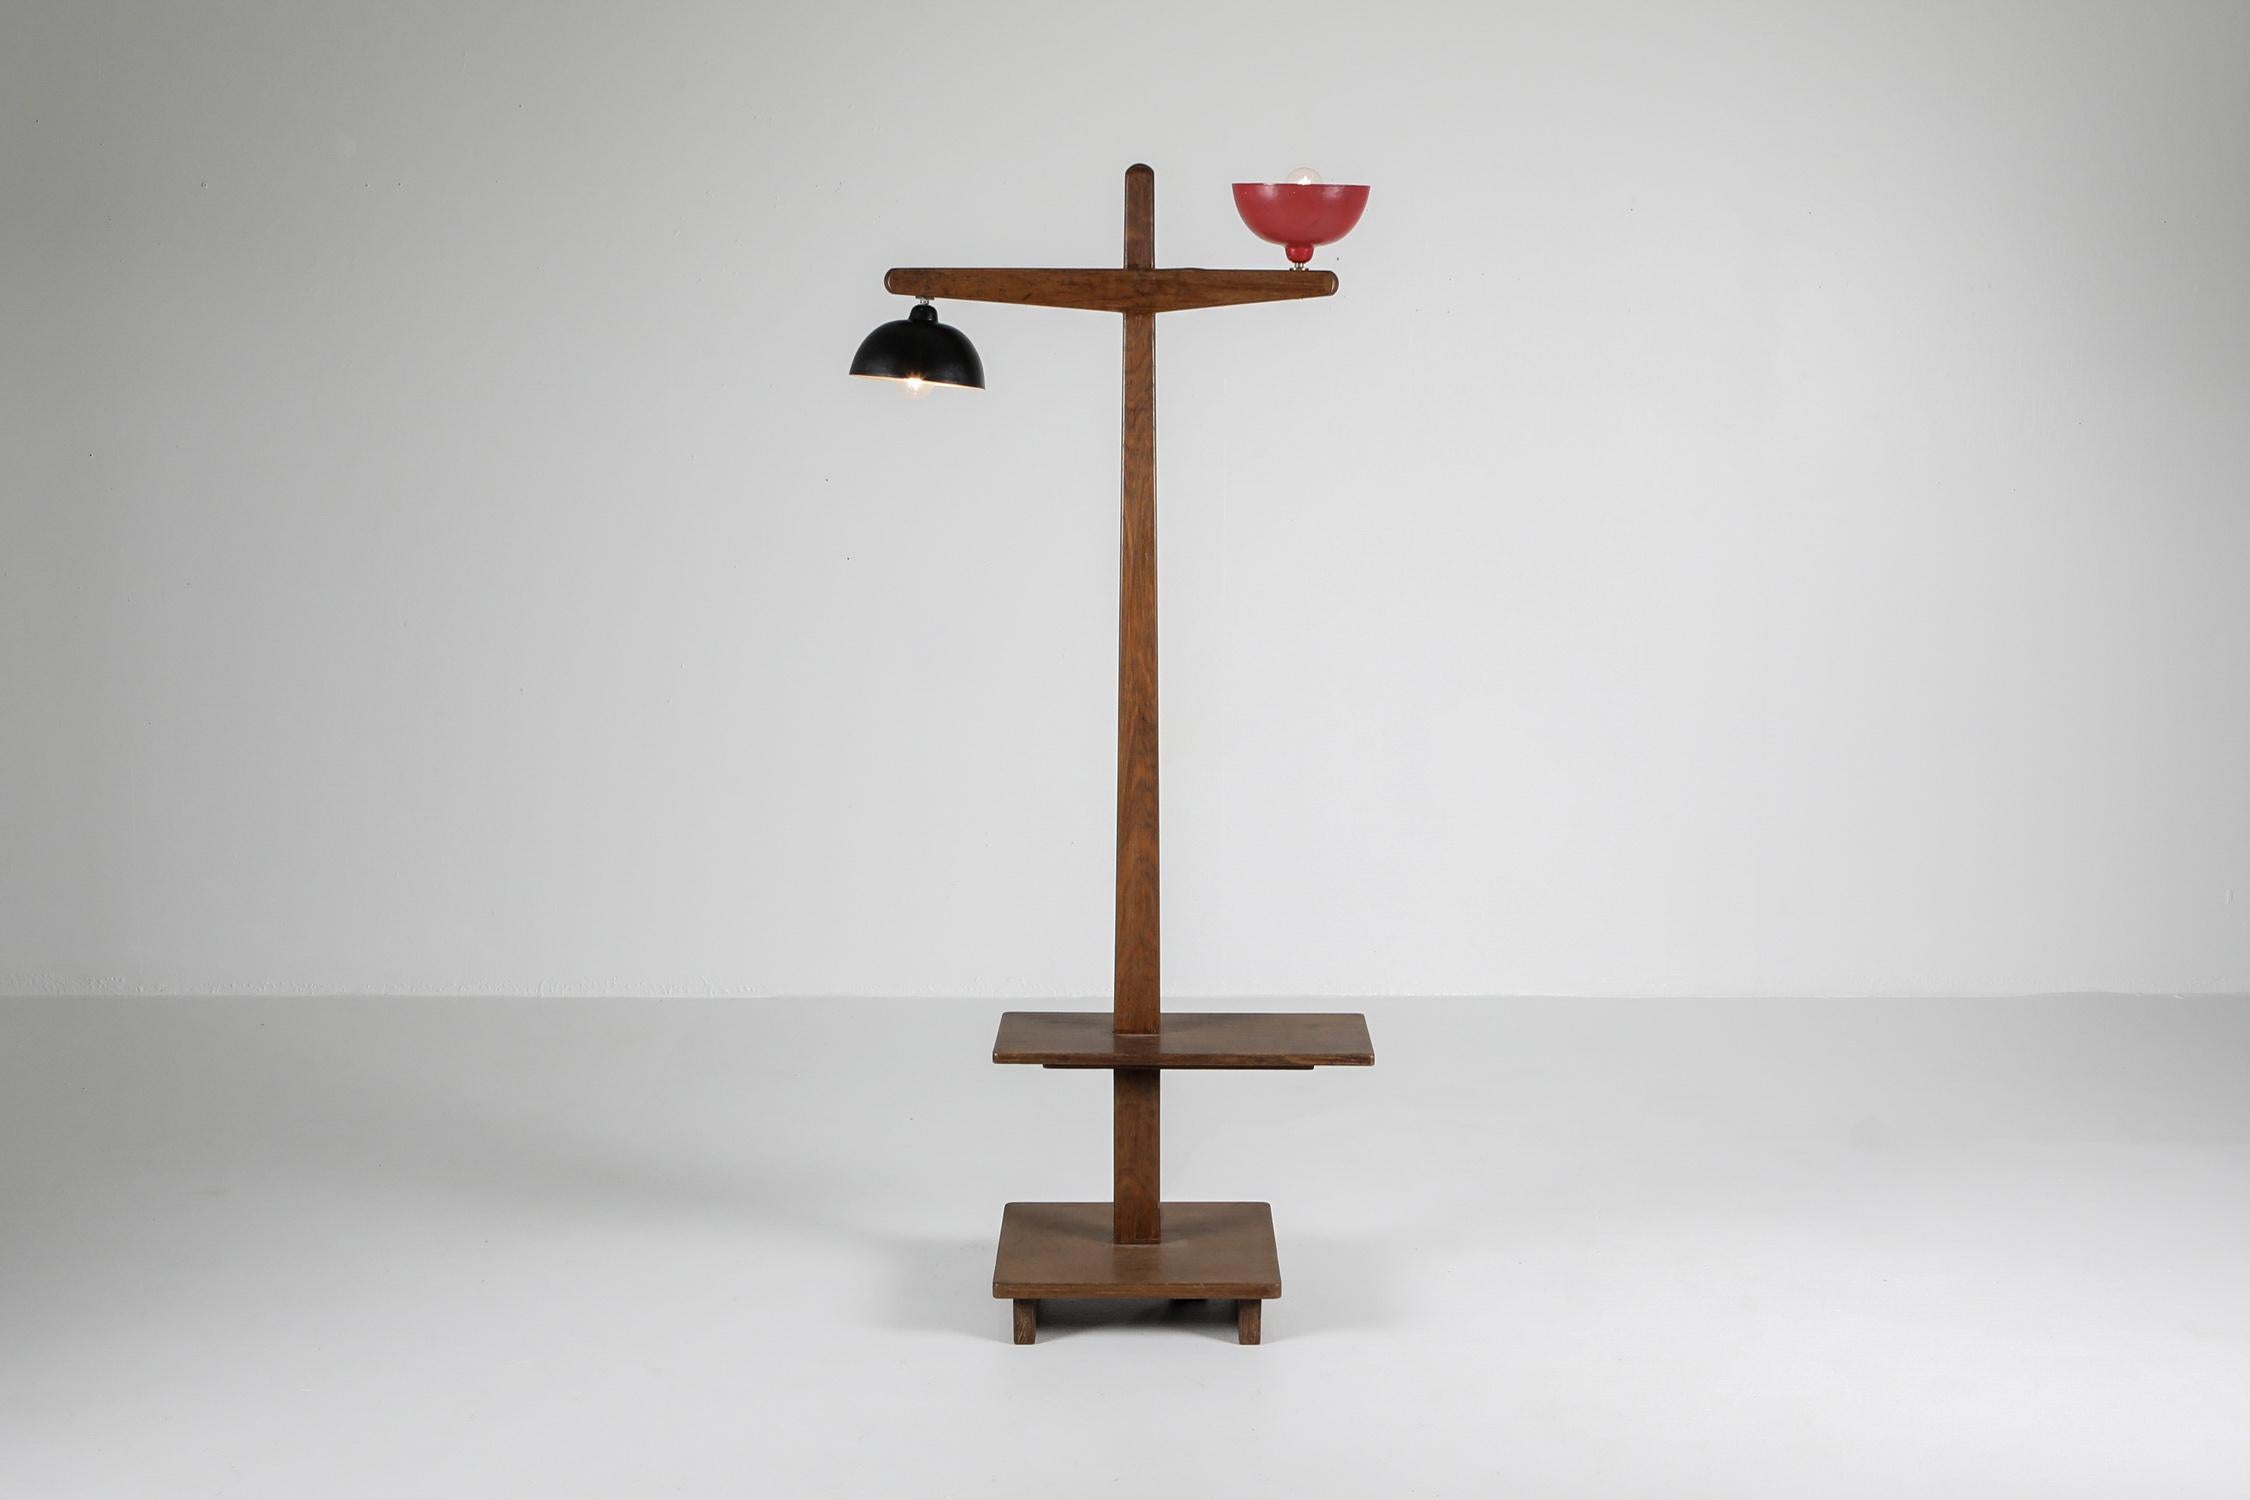 Jeanneret, Chandigarh, teak lamp, circa 1955, in original condition

Lamp with two lights, known as 